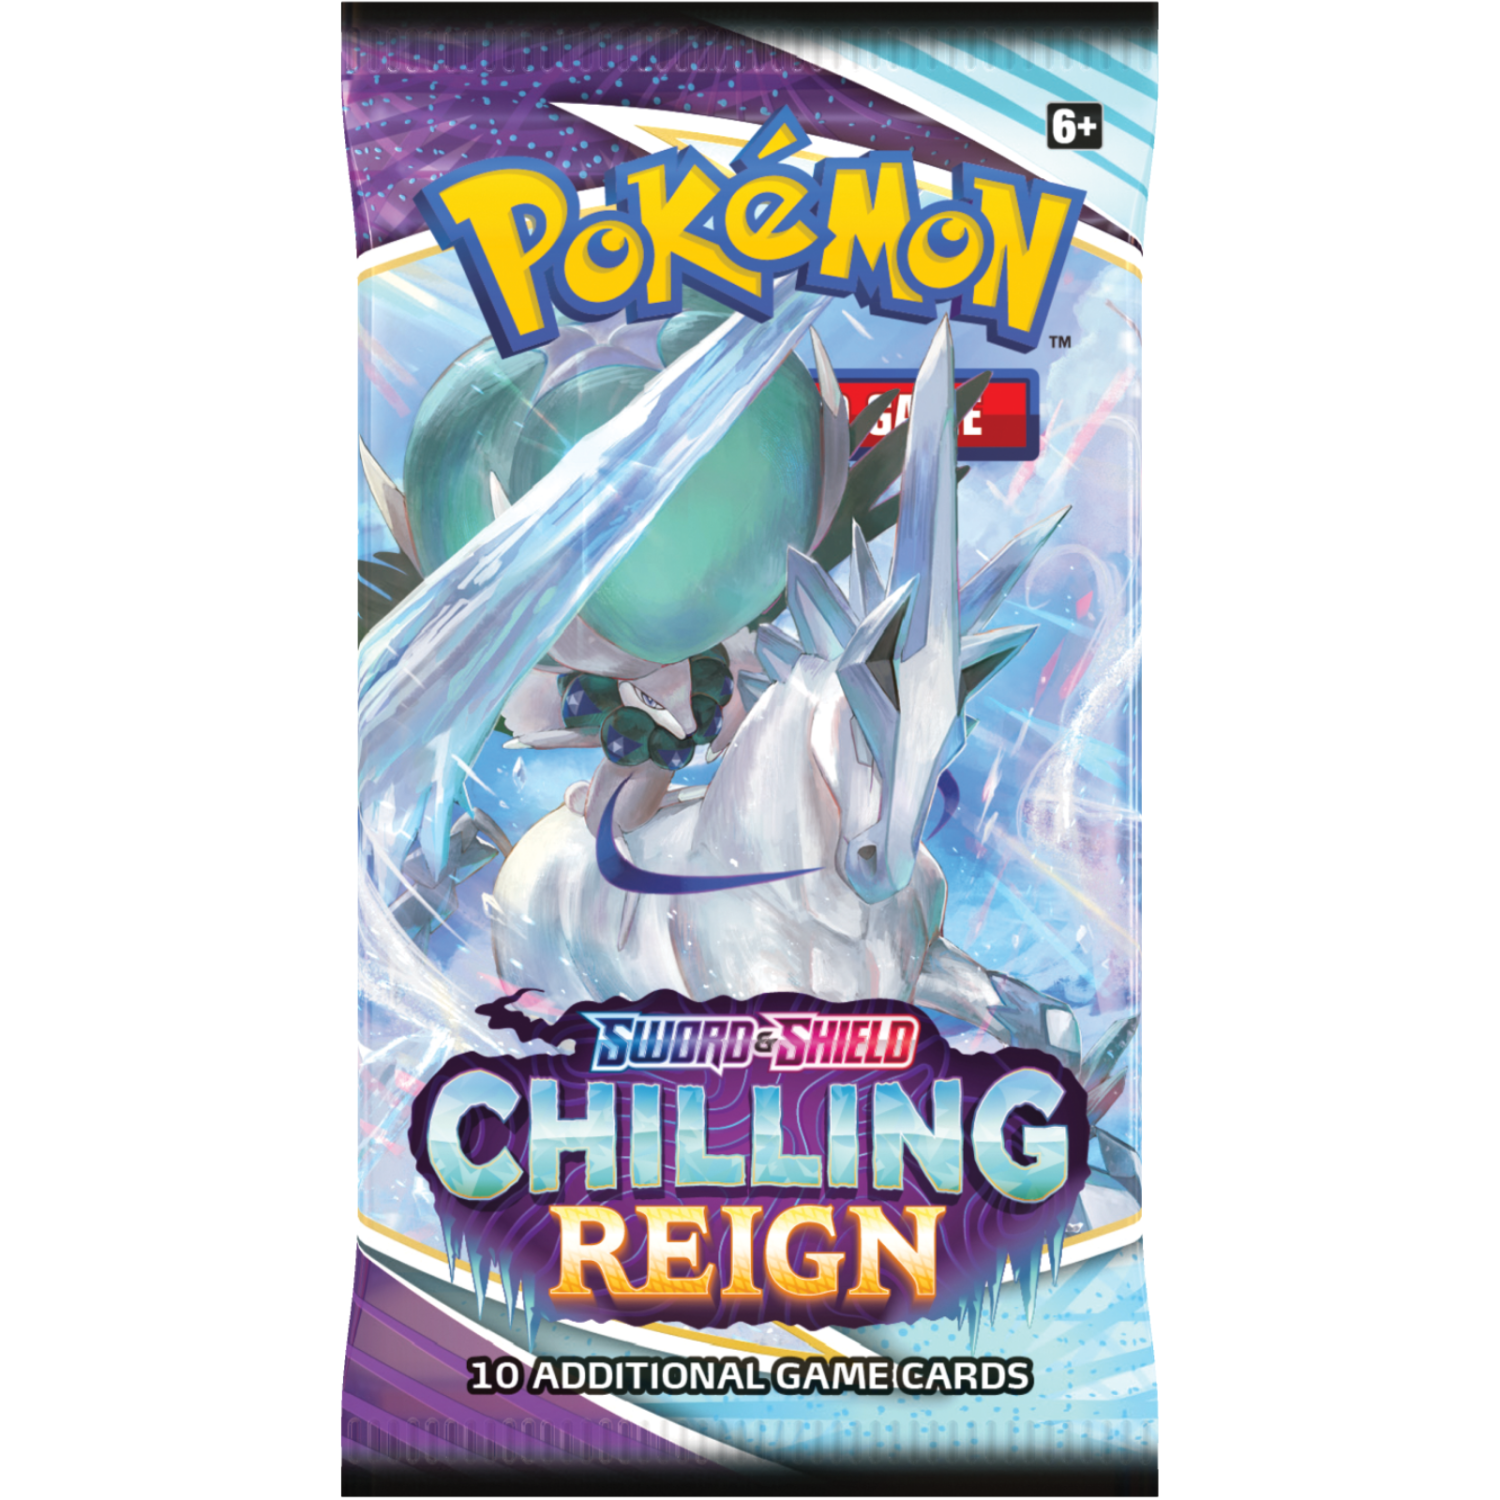 Pokemon Sword and Shield Chilling Reign Booster Pack